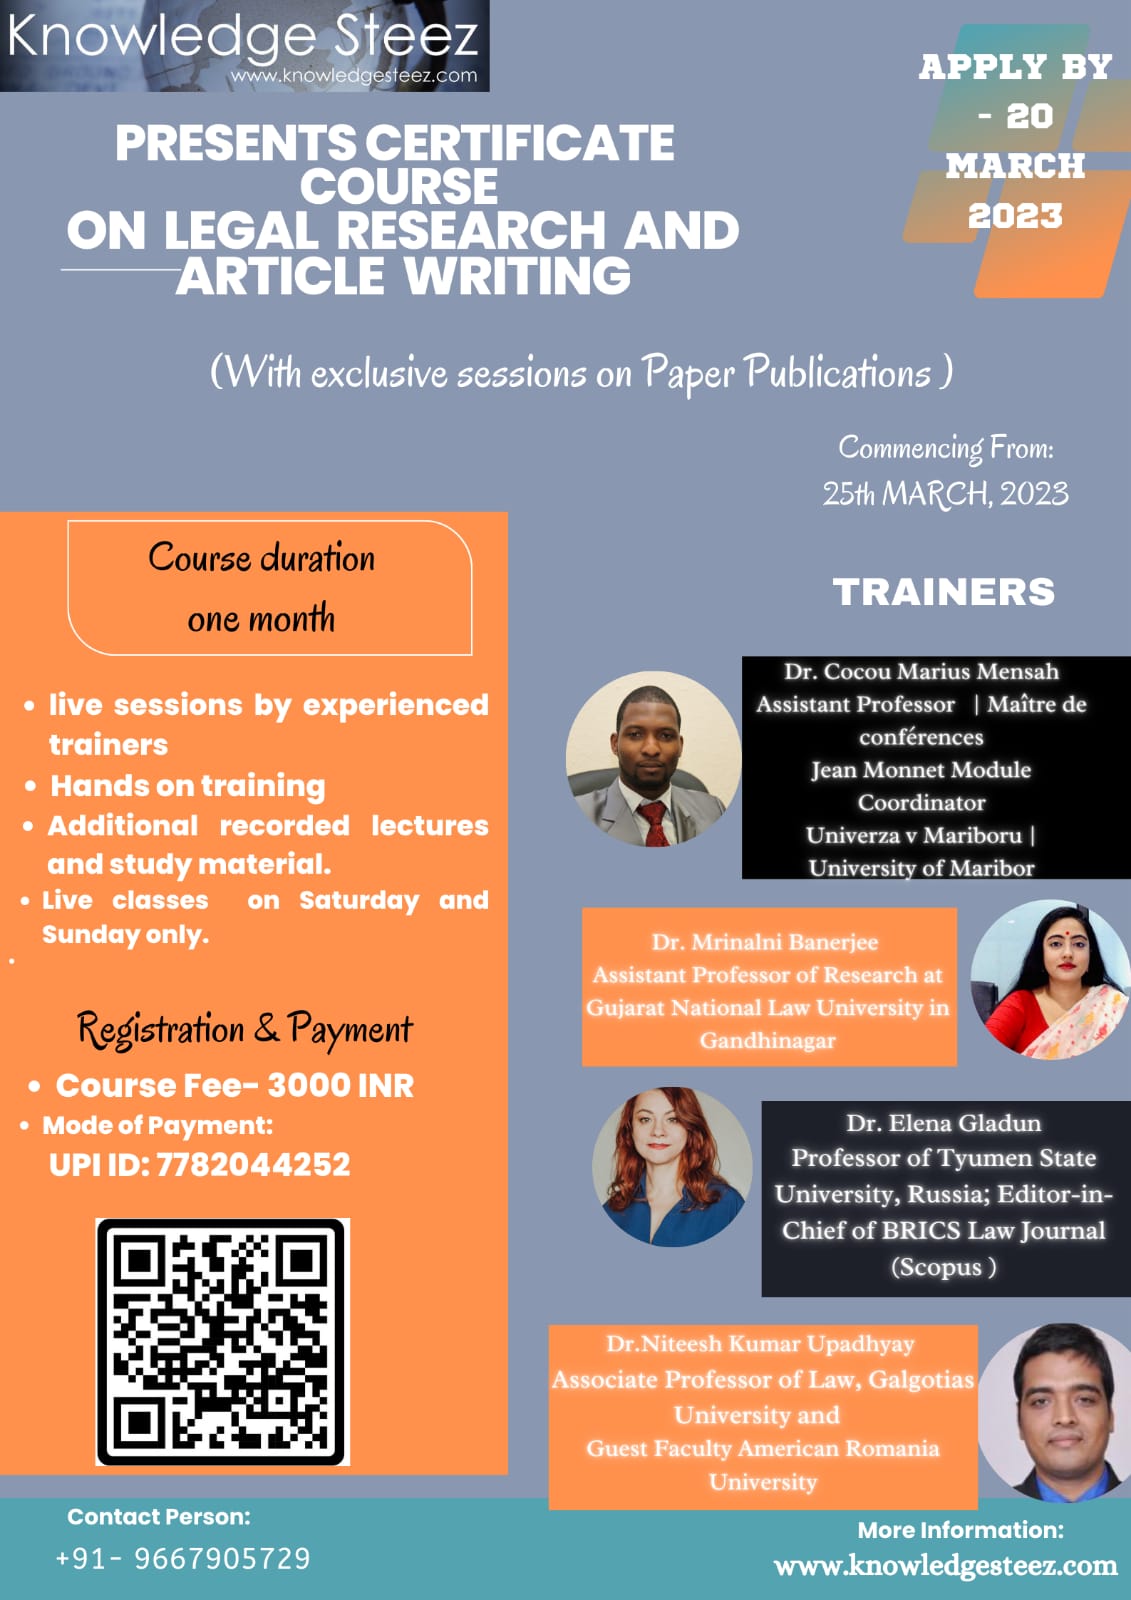 Certificate Course on Legal Research and Article Writing organised by Knowledge Steez